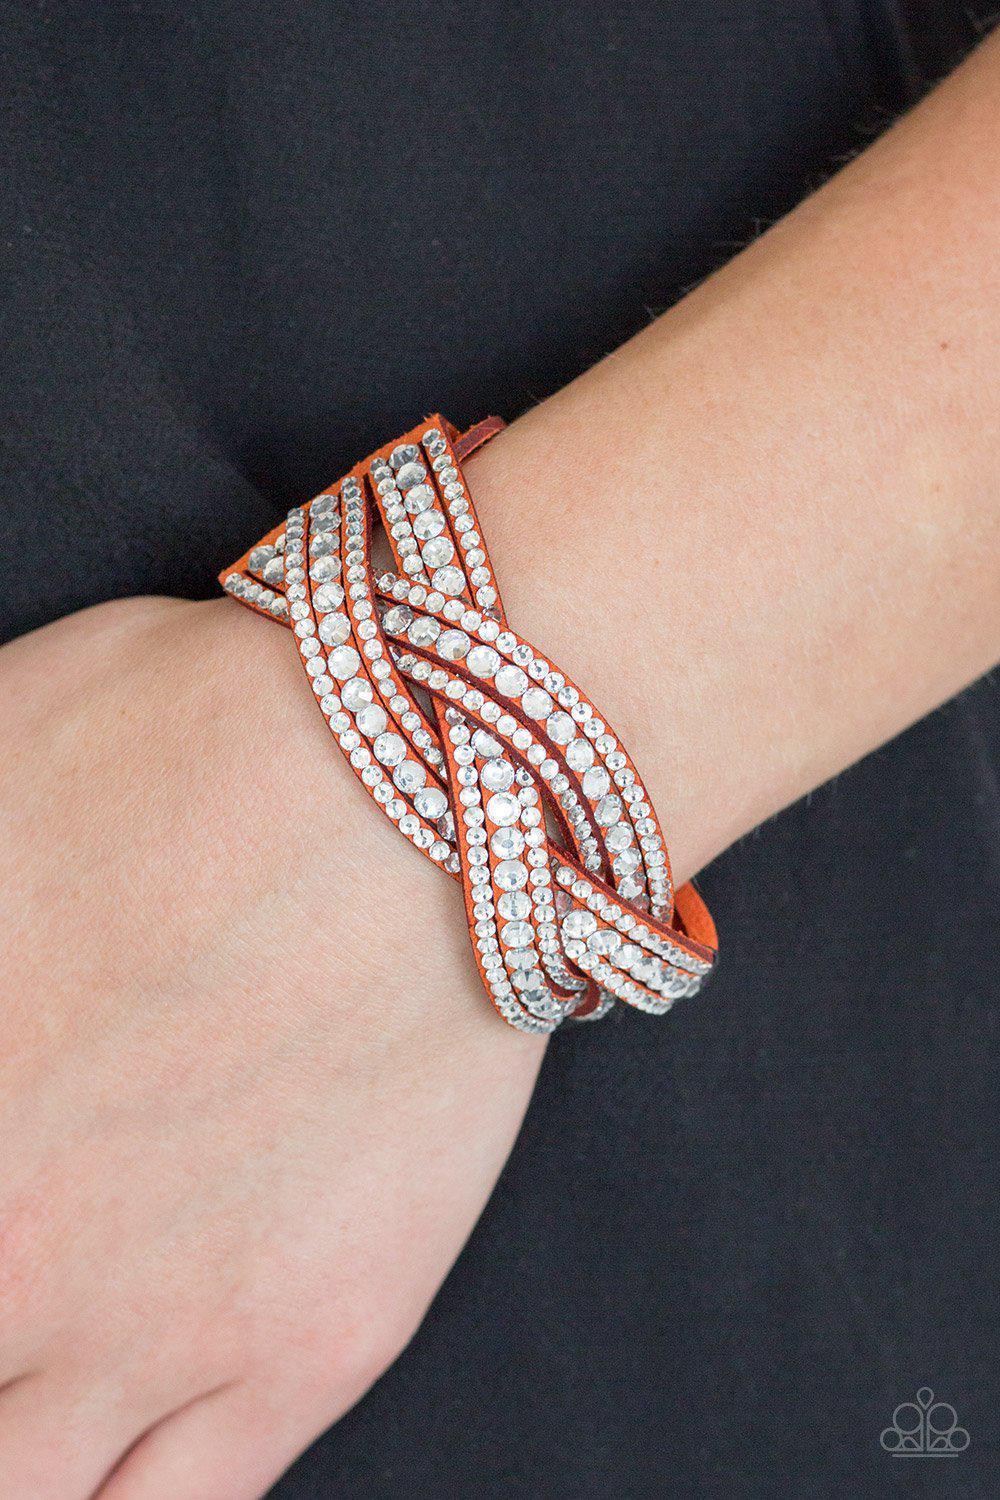 Bring On The Bling Orange Braided Wrap Snap Bracelet- Paparazzi Accessories-CarasShop.com - $5 Jewelry by Cara Jewels